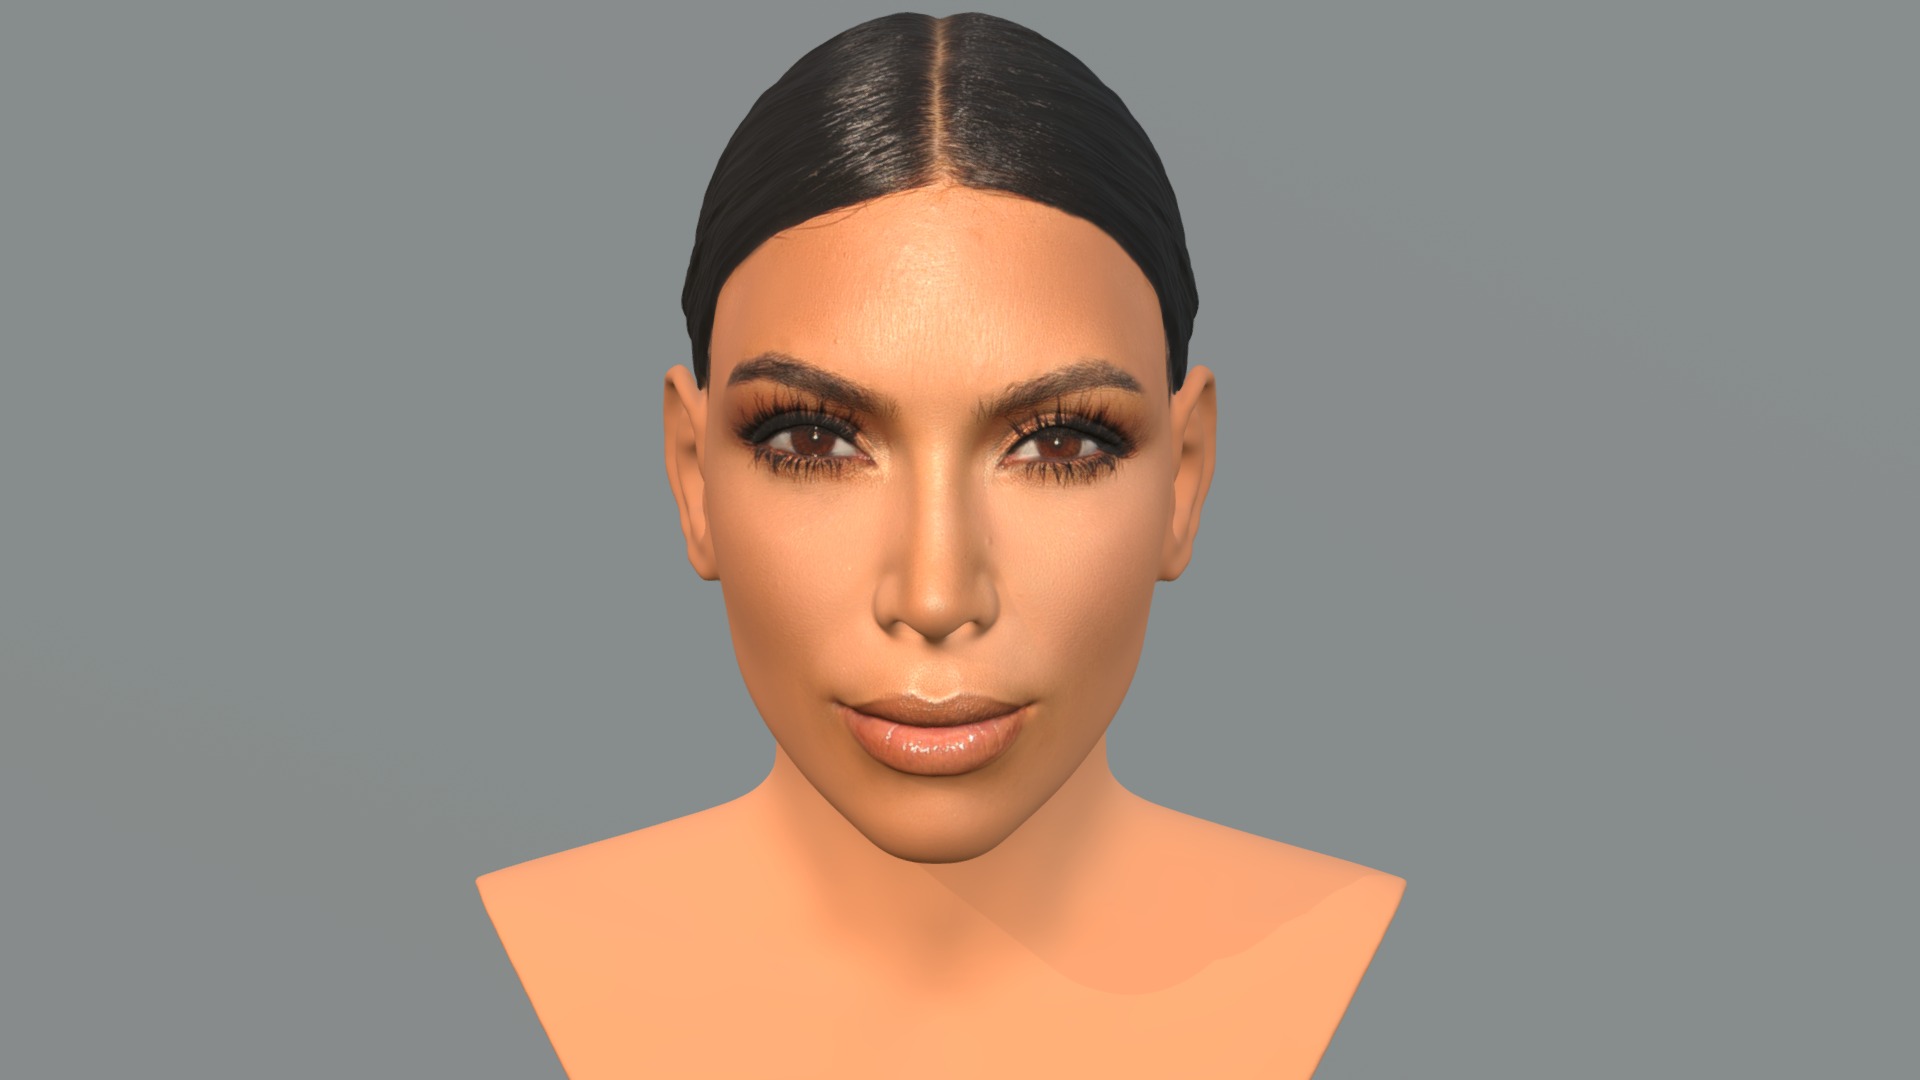 3D model Kim Kardashian bust for full color 3D printing - This is a 3D model of the Kim Kardashian bust for full color 3D printing. The 3D model is about a person with short black hair.